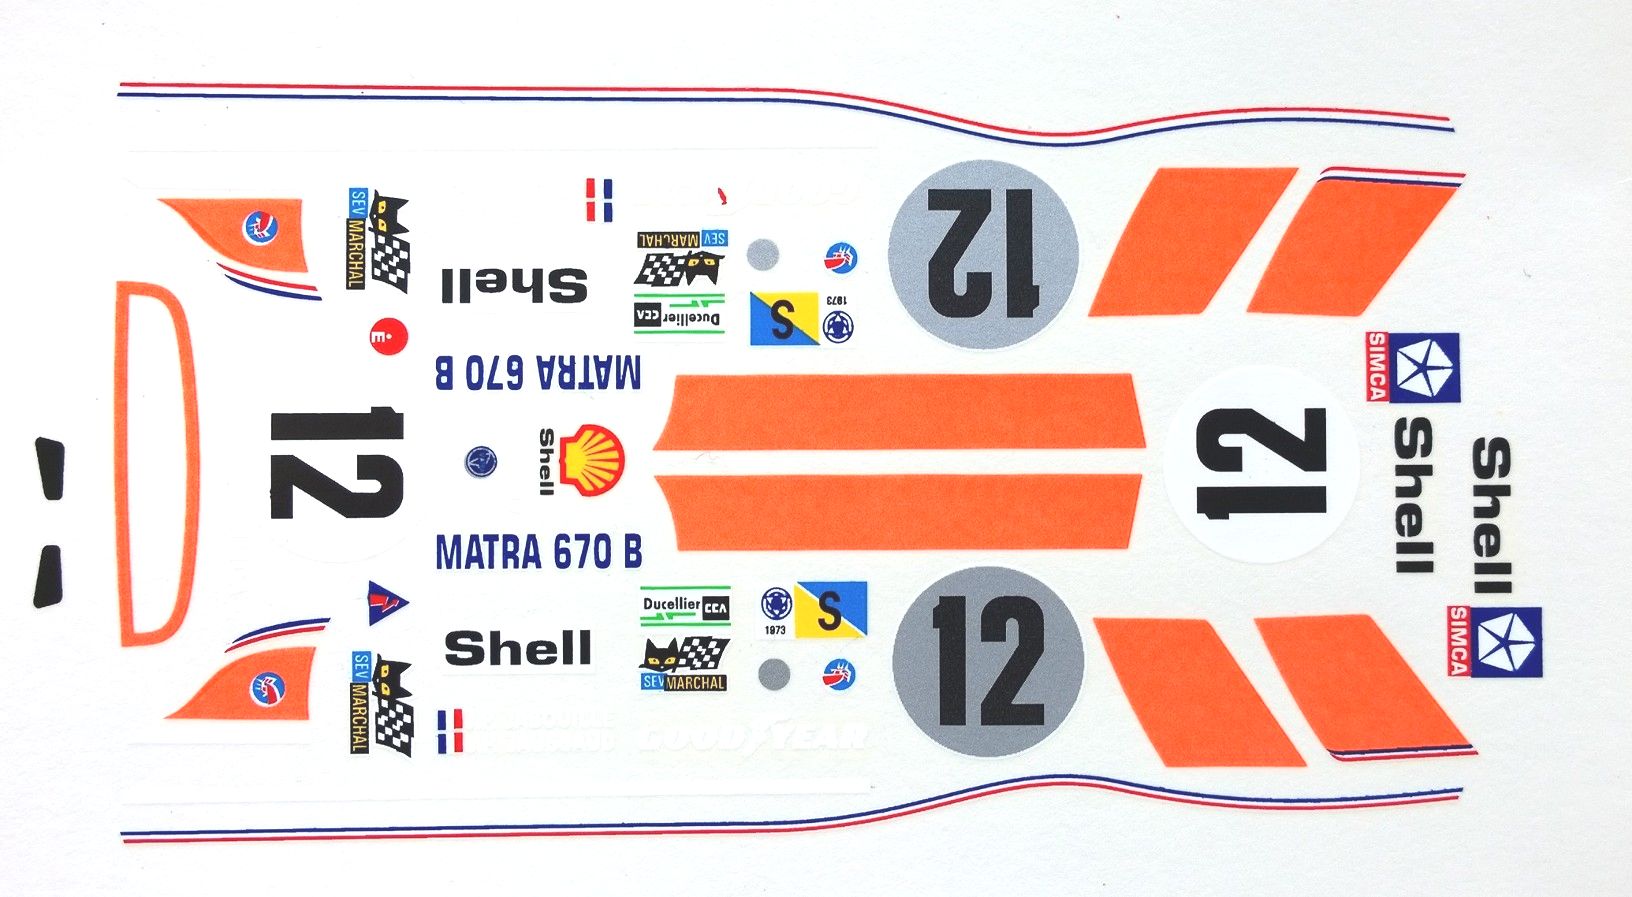 Scalextric/Slot Car 1/32 Scale Waterslide Decals ws012w 